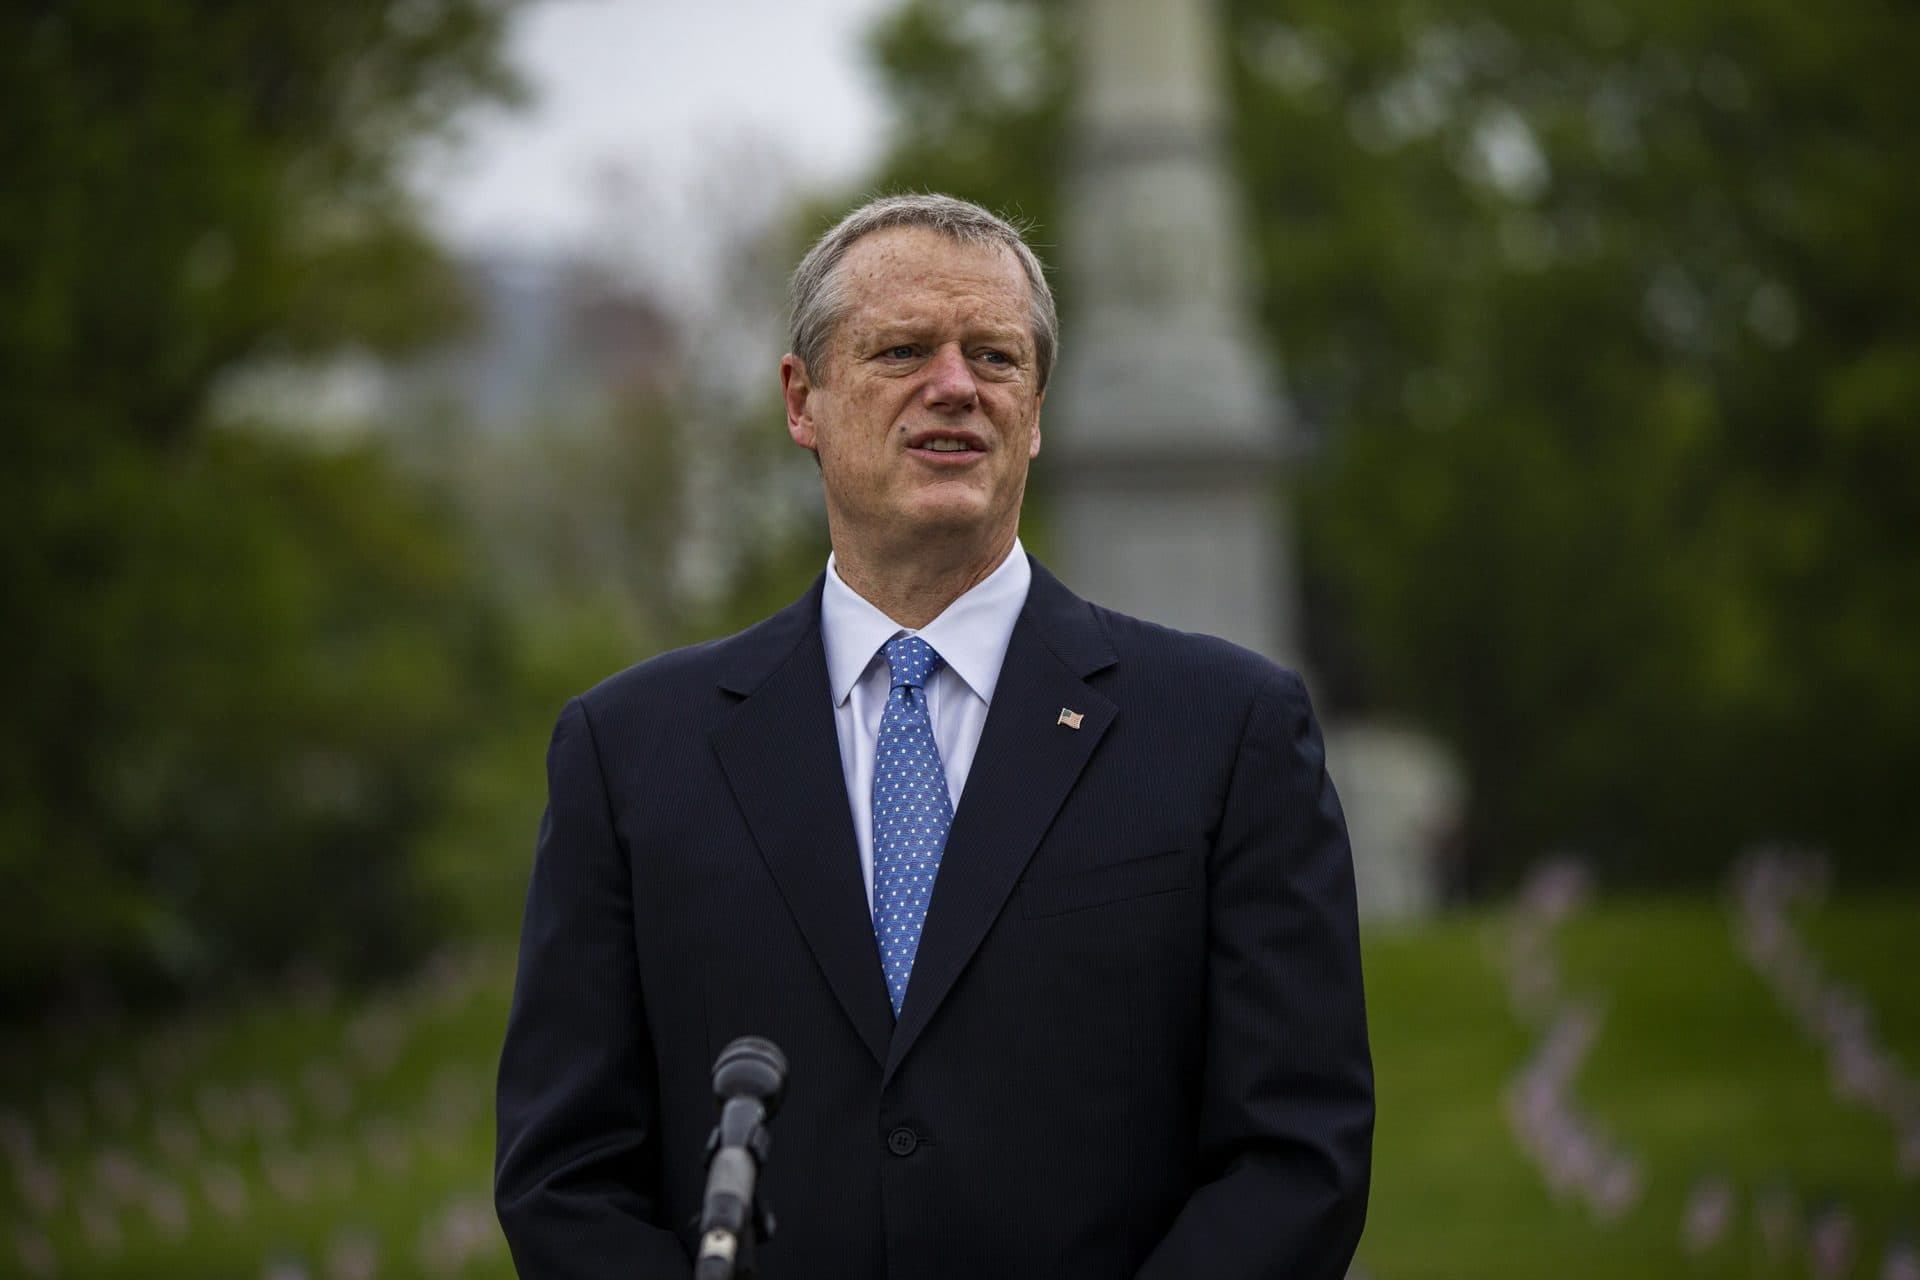 Gov. Charlie Baker stands during the Memorial Day wreath ceremony in the Boston Common. (Jesse Costa/WBUR)